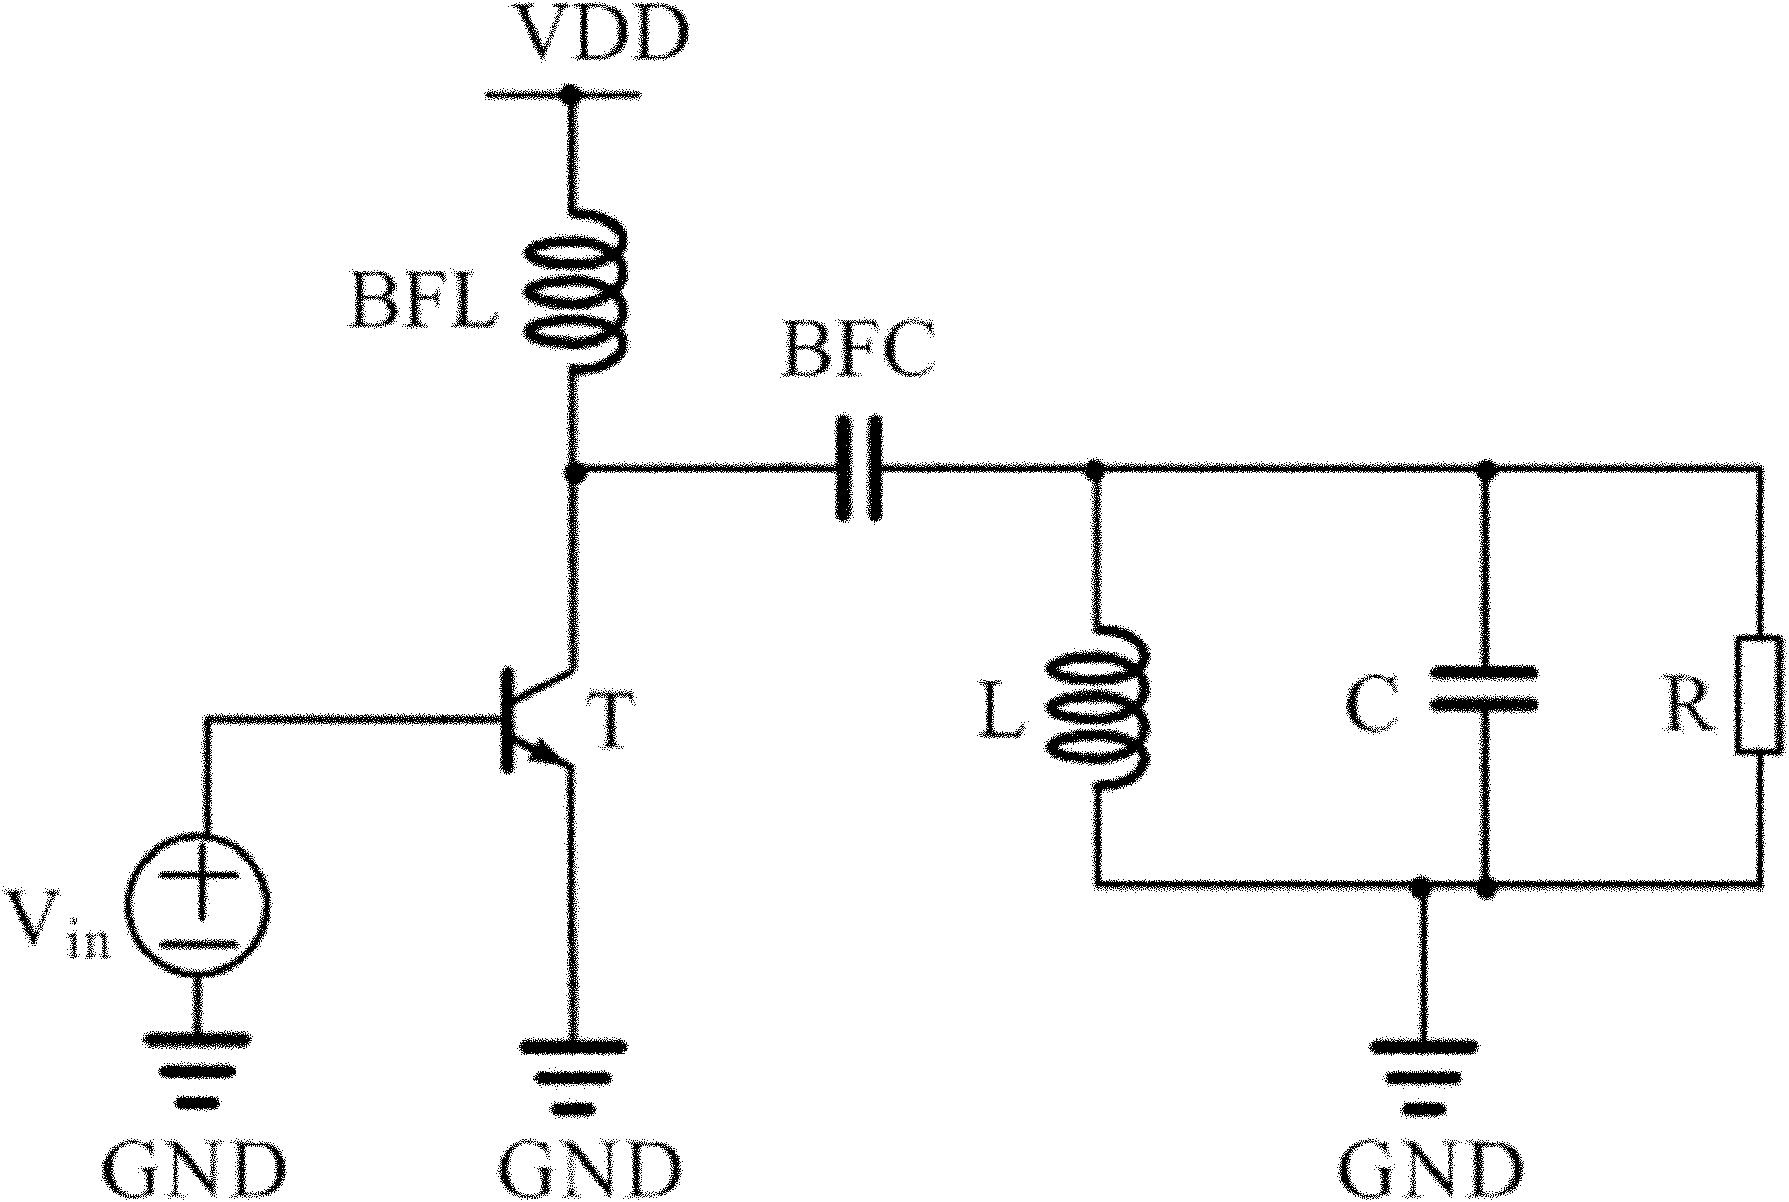 SiGe bipolar complementary metal oxide semiconductor (BiCMOS) radio-frequency power amplifier